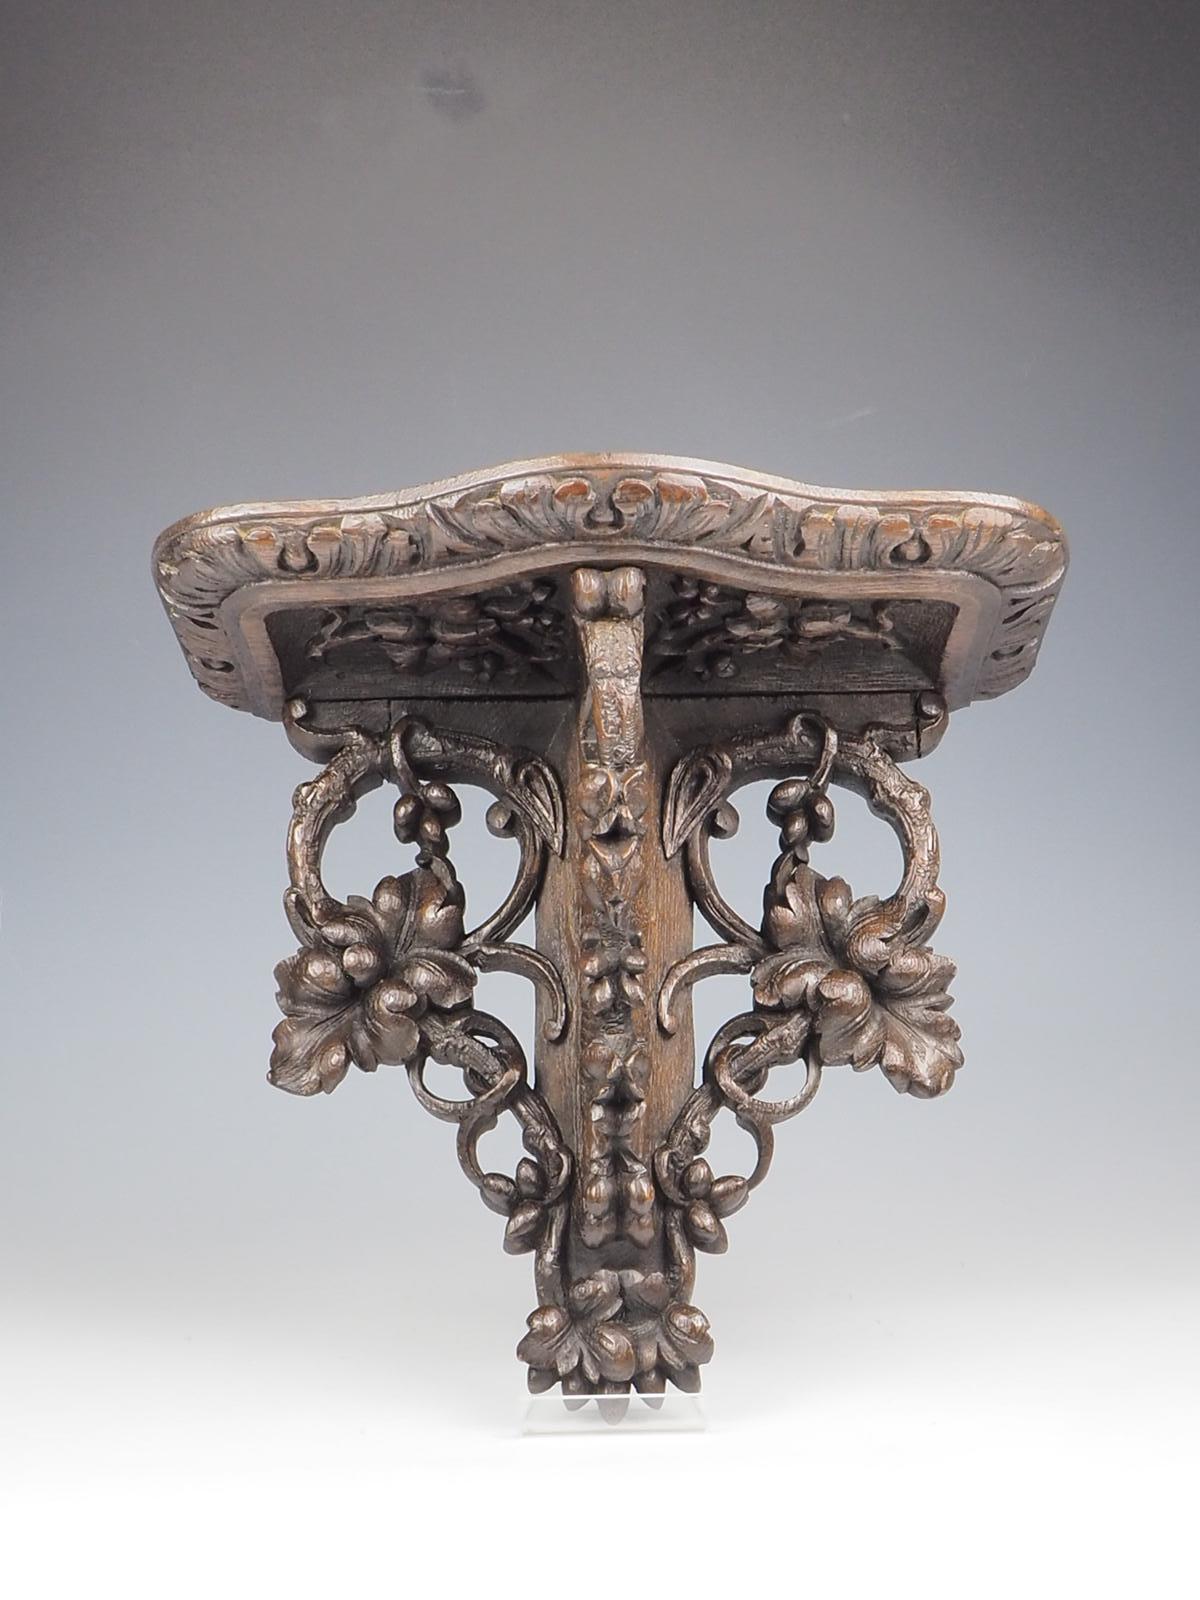 Antique Hand Carved Oak Wall Mounted Shelf, a true testament to the timeless beauty of English oak craftsmanship. This exquisite piece showcases an impressive level of detail, with intricate carvings of vine leaves that add a touch of elegance and